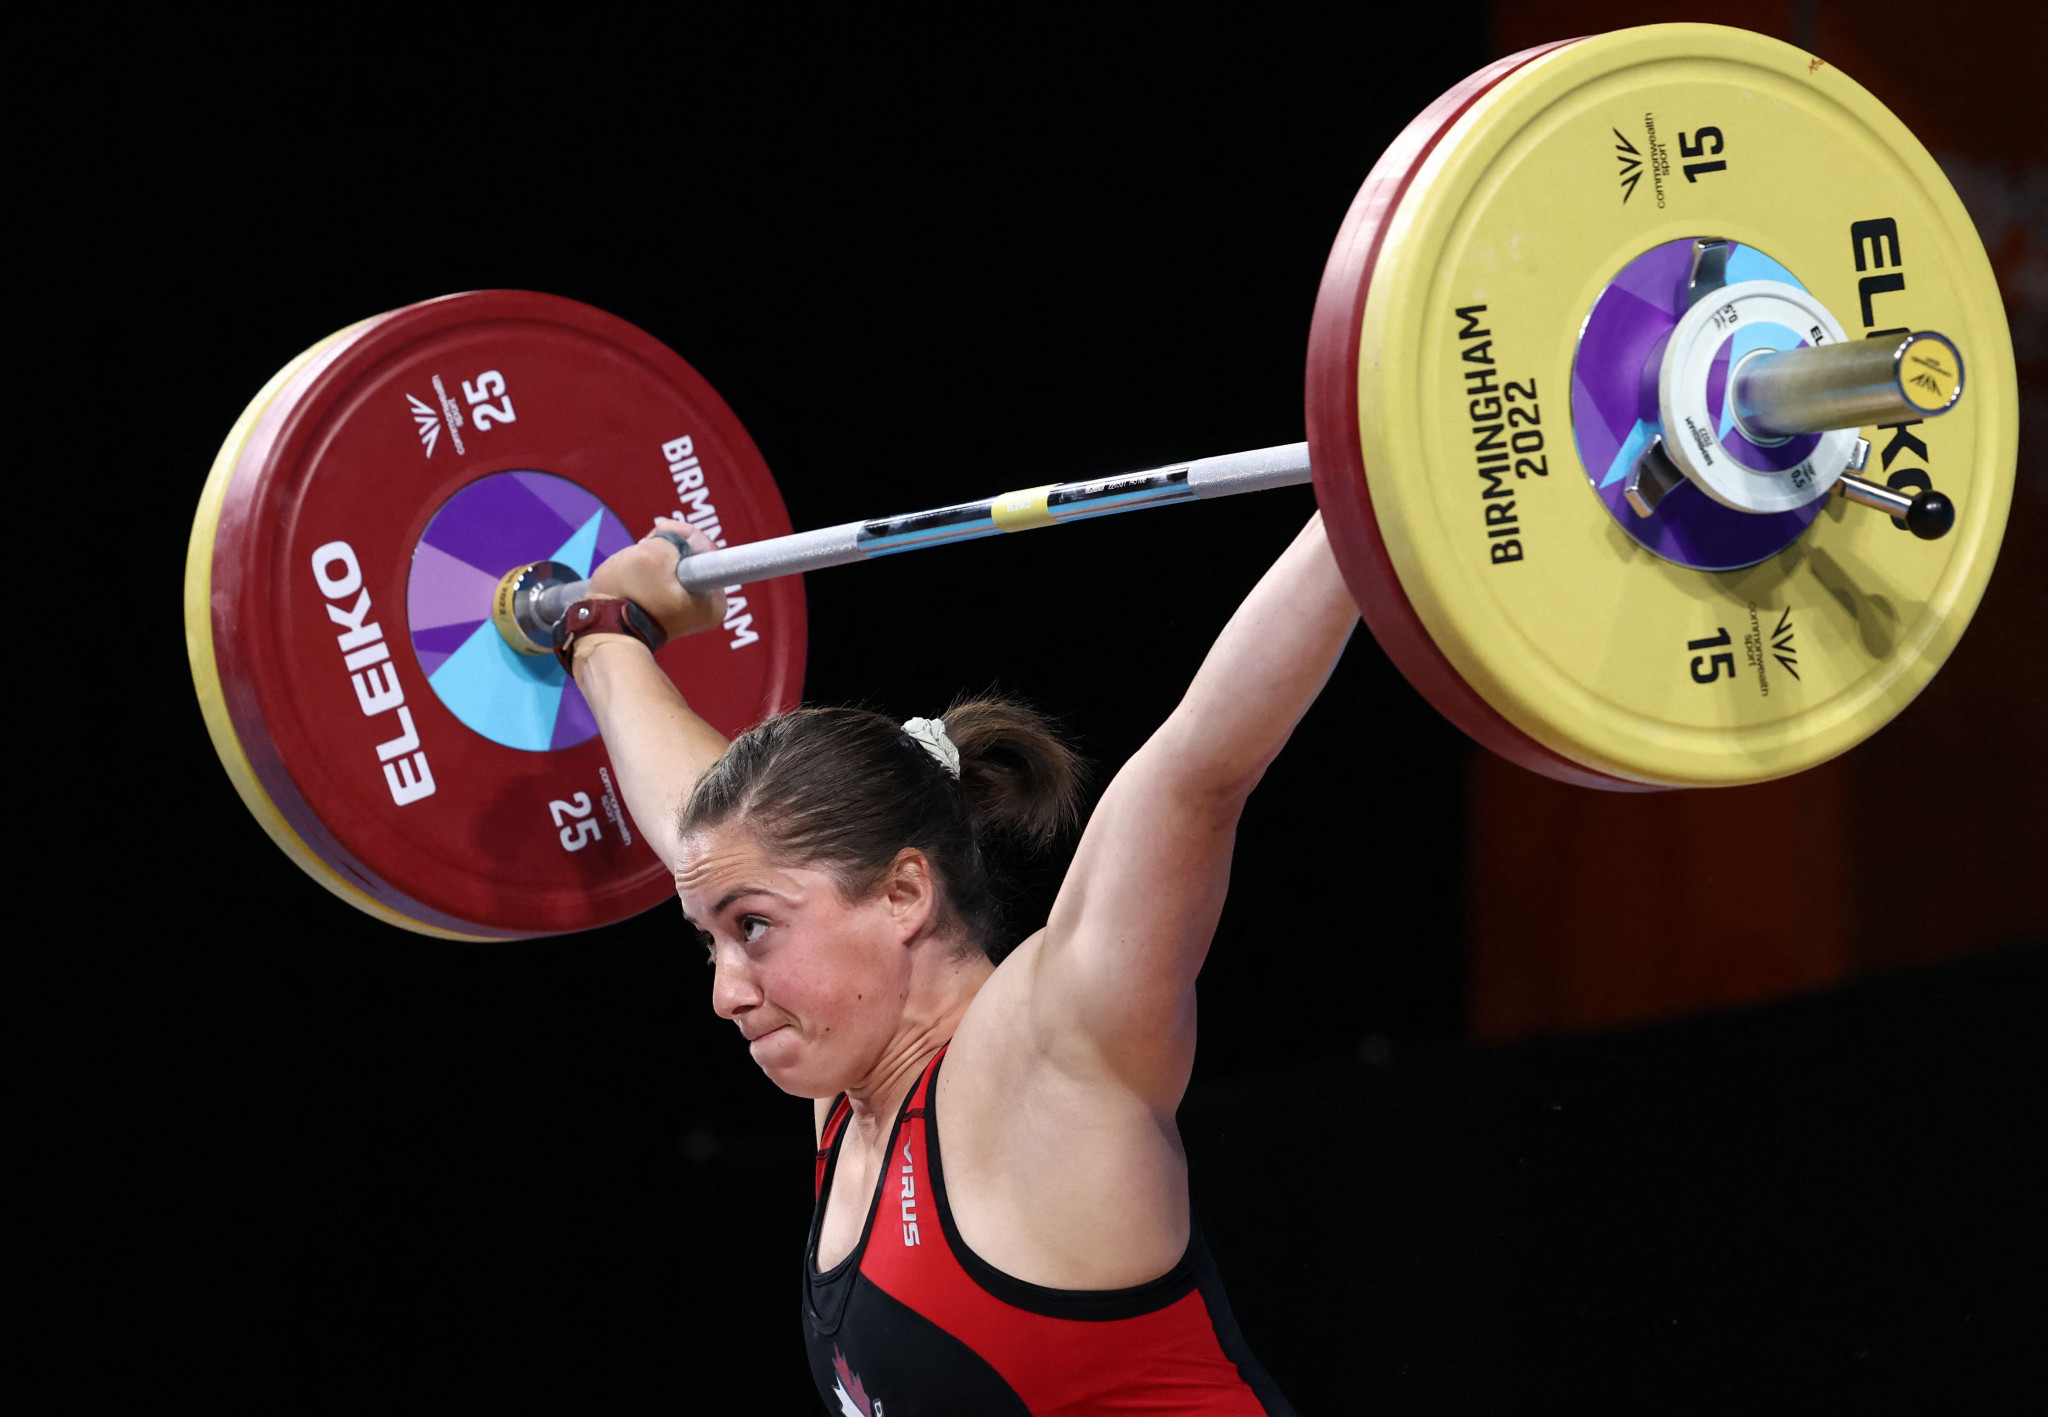 Canada's Maude G Charron won the women's 64kg final by a margin of 15kg ©Getty Images